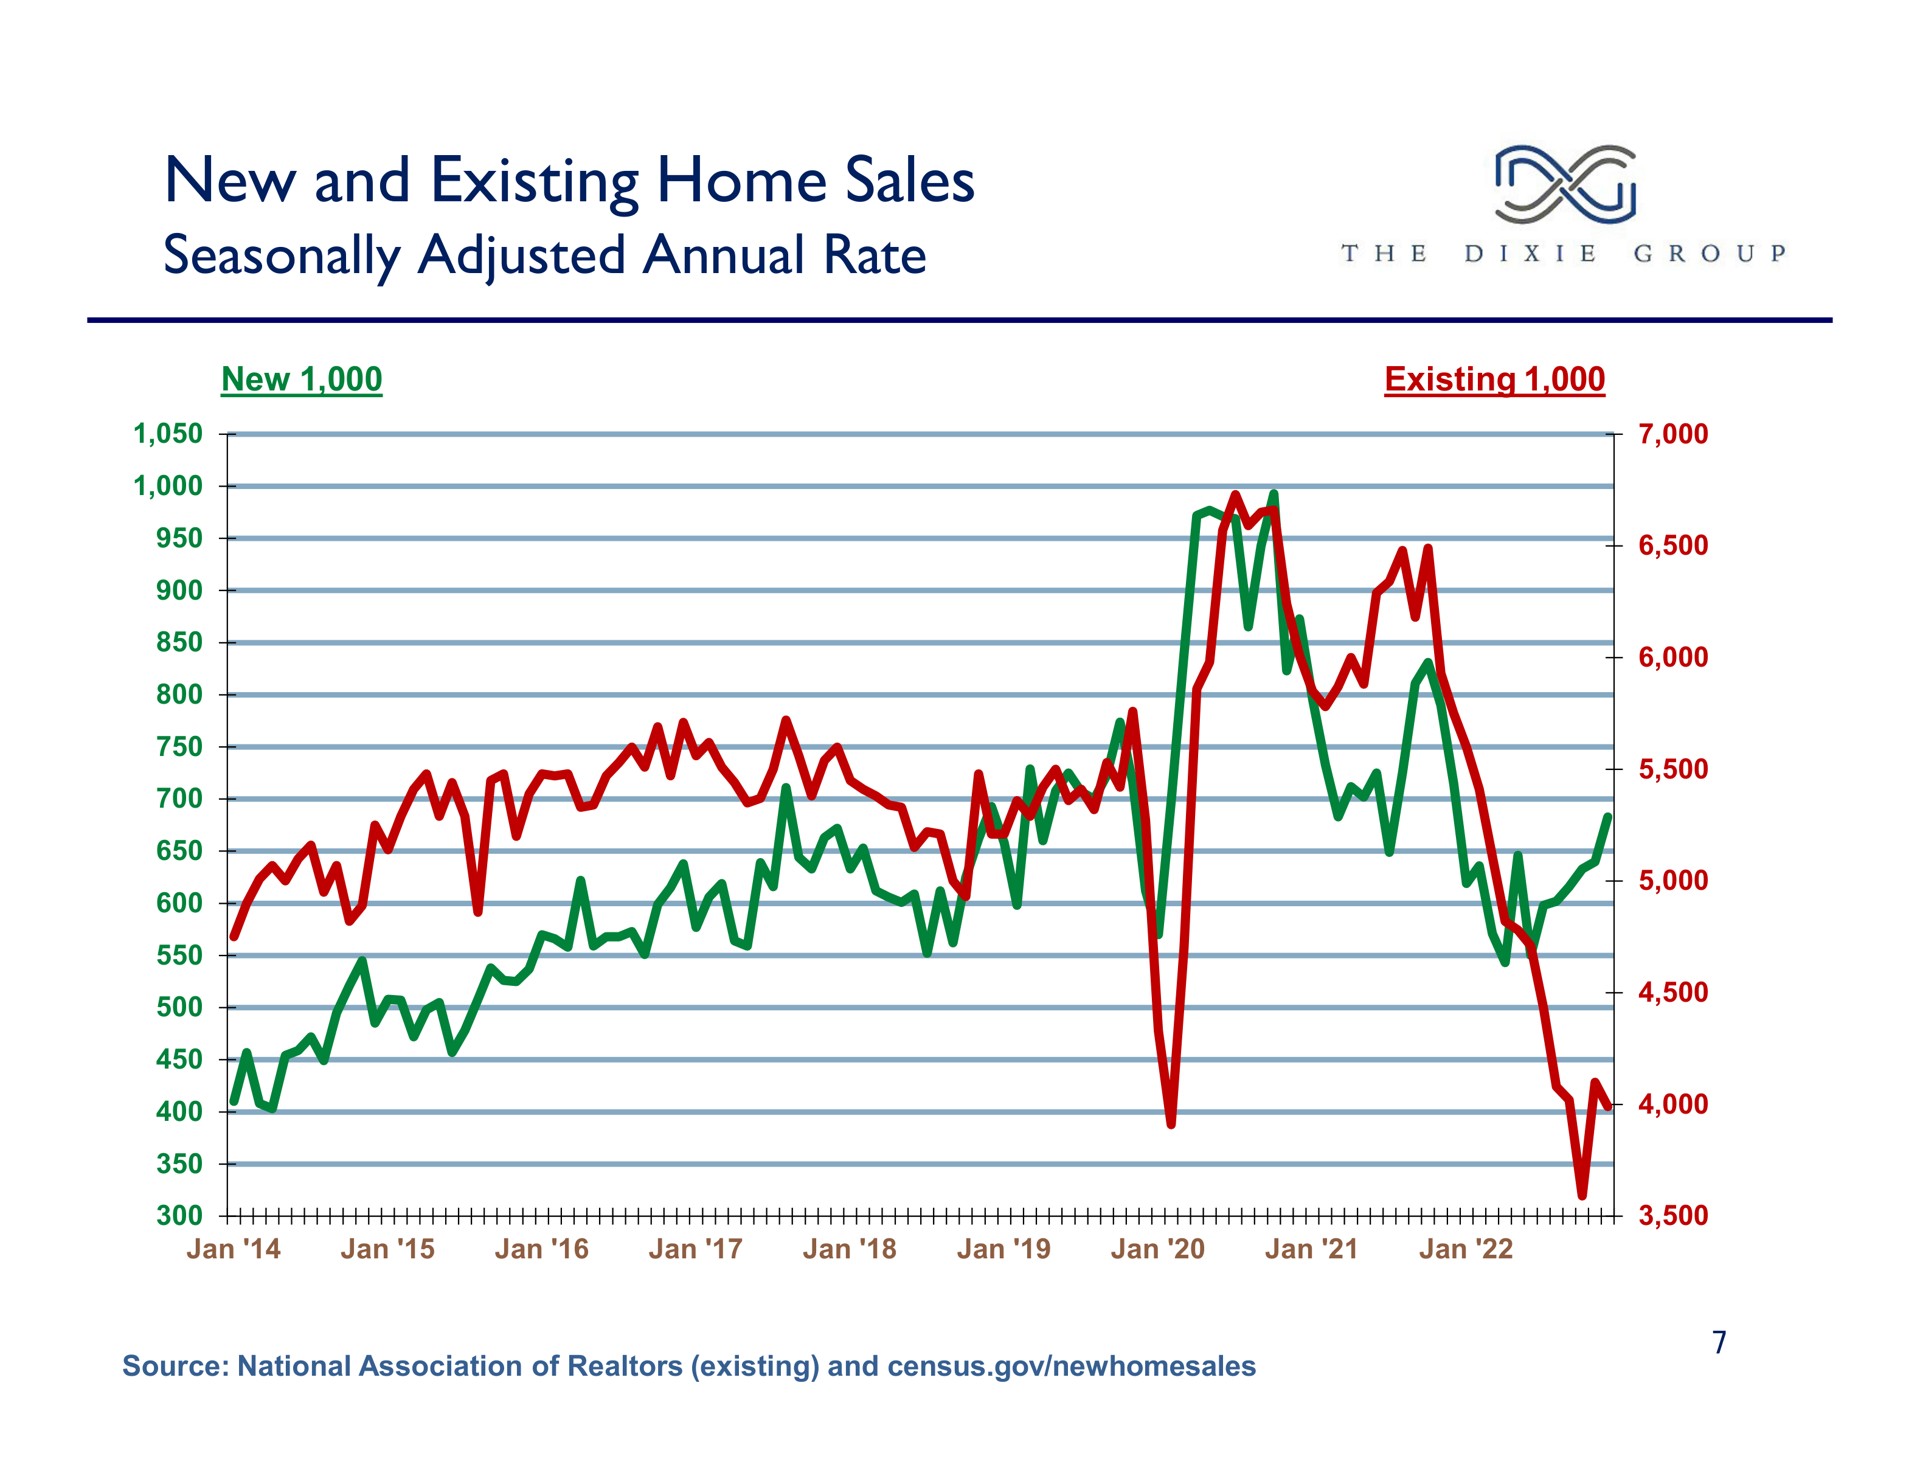 new and existing home sales seasonally adjusted annual rate the dixie group | The Dixie Group